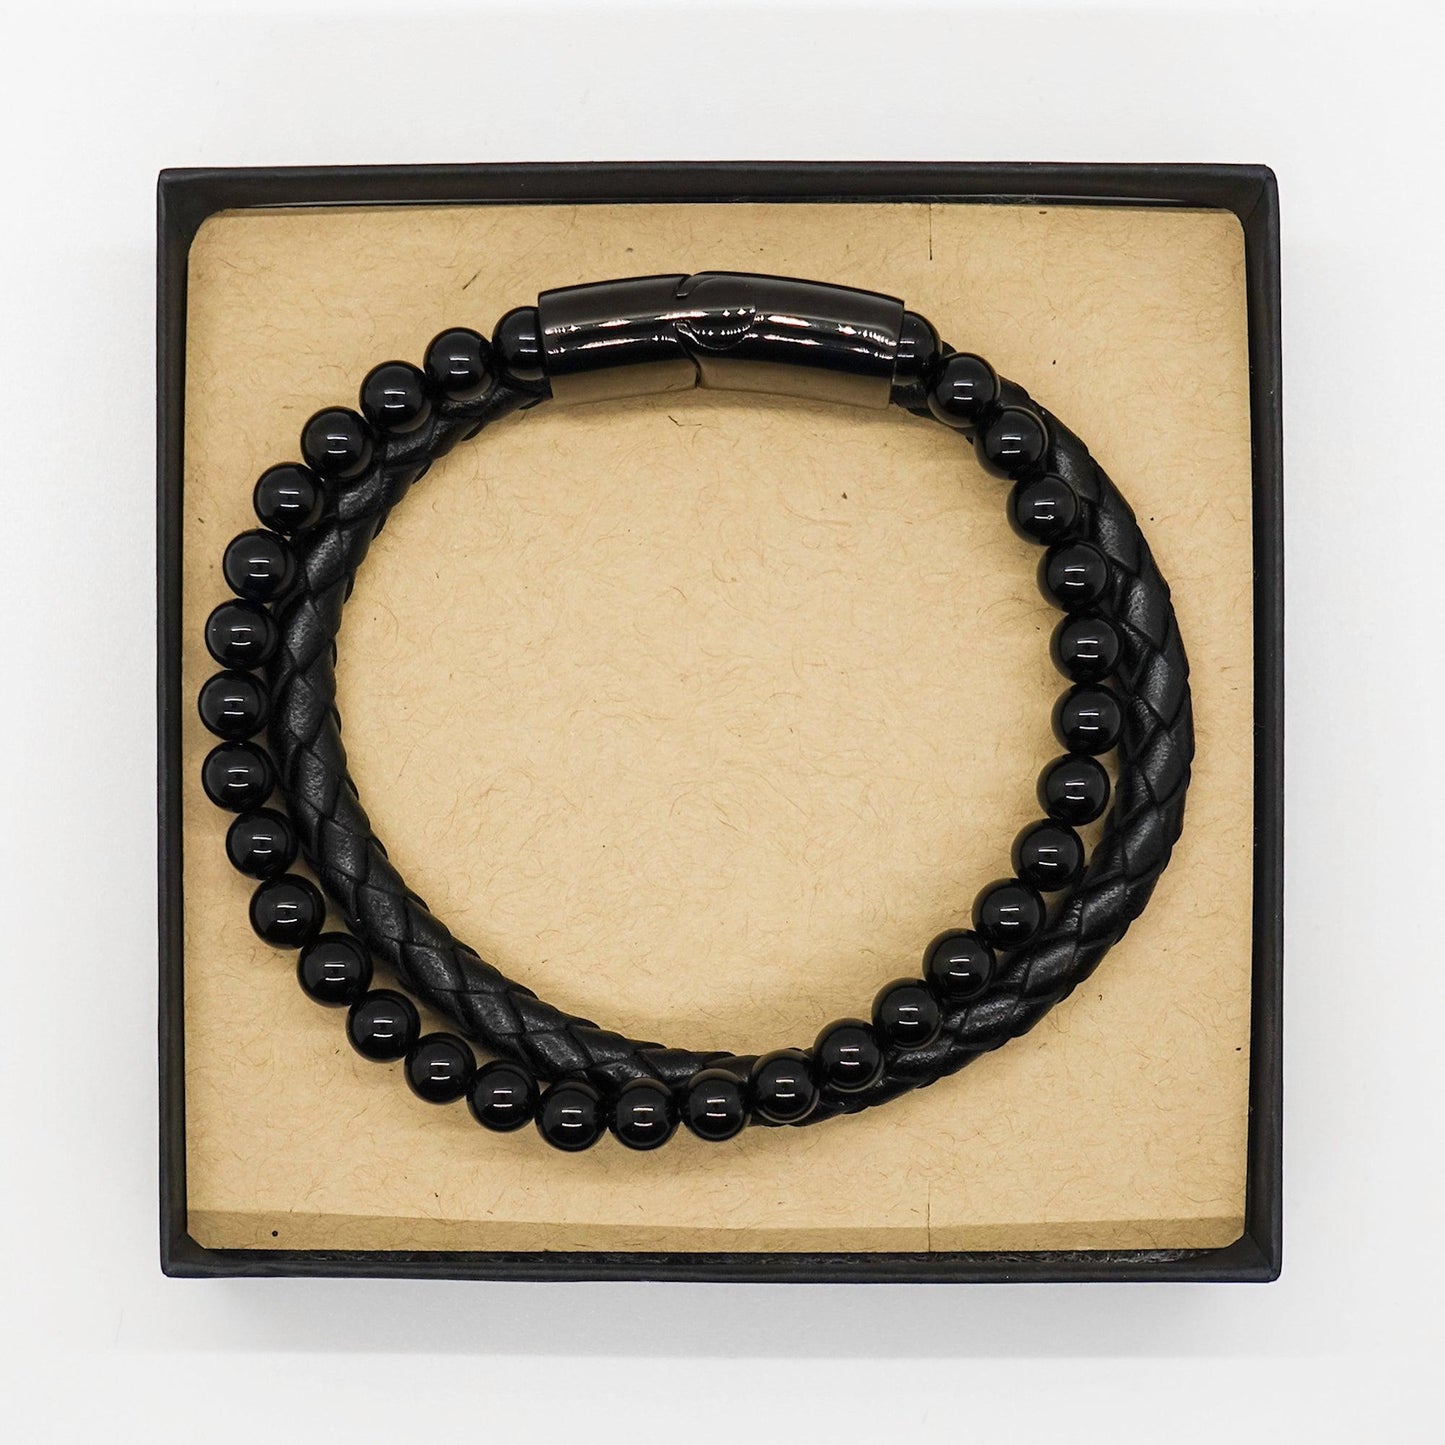 Compliance Officer Black Braided Stone Leather Bracelet - Thanks for being who you are - Birthday Christmas Jewelry Gifts Coworkers Colleague Boss - Mallard Moon Gift Shop